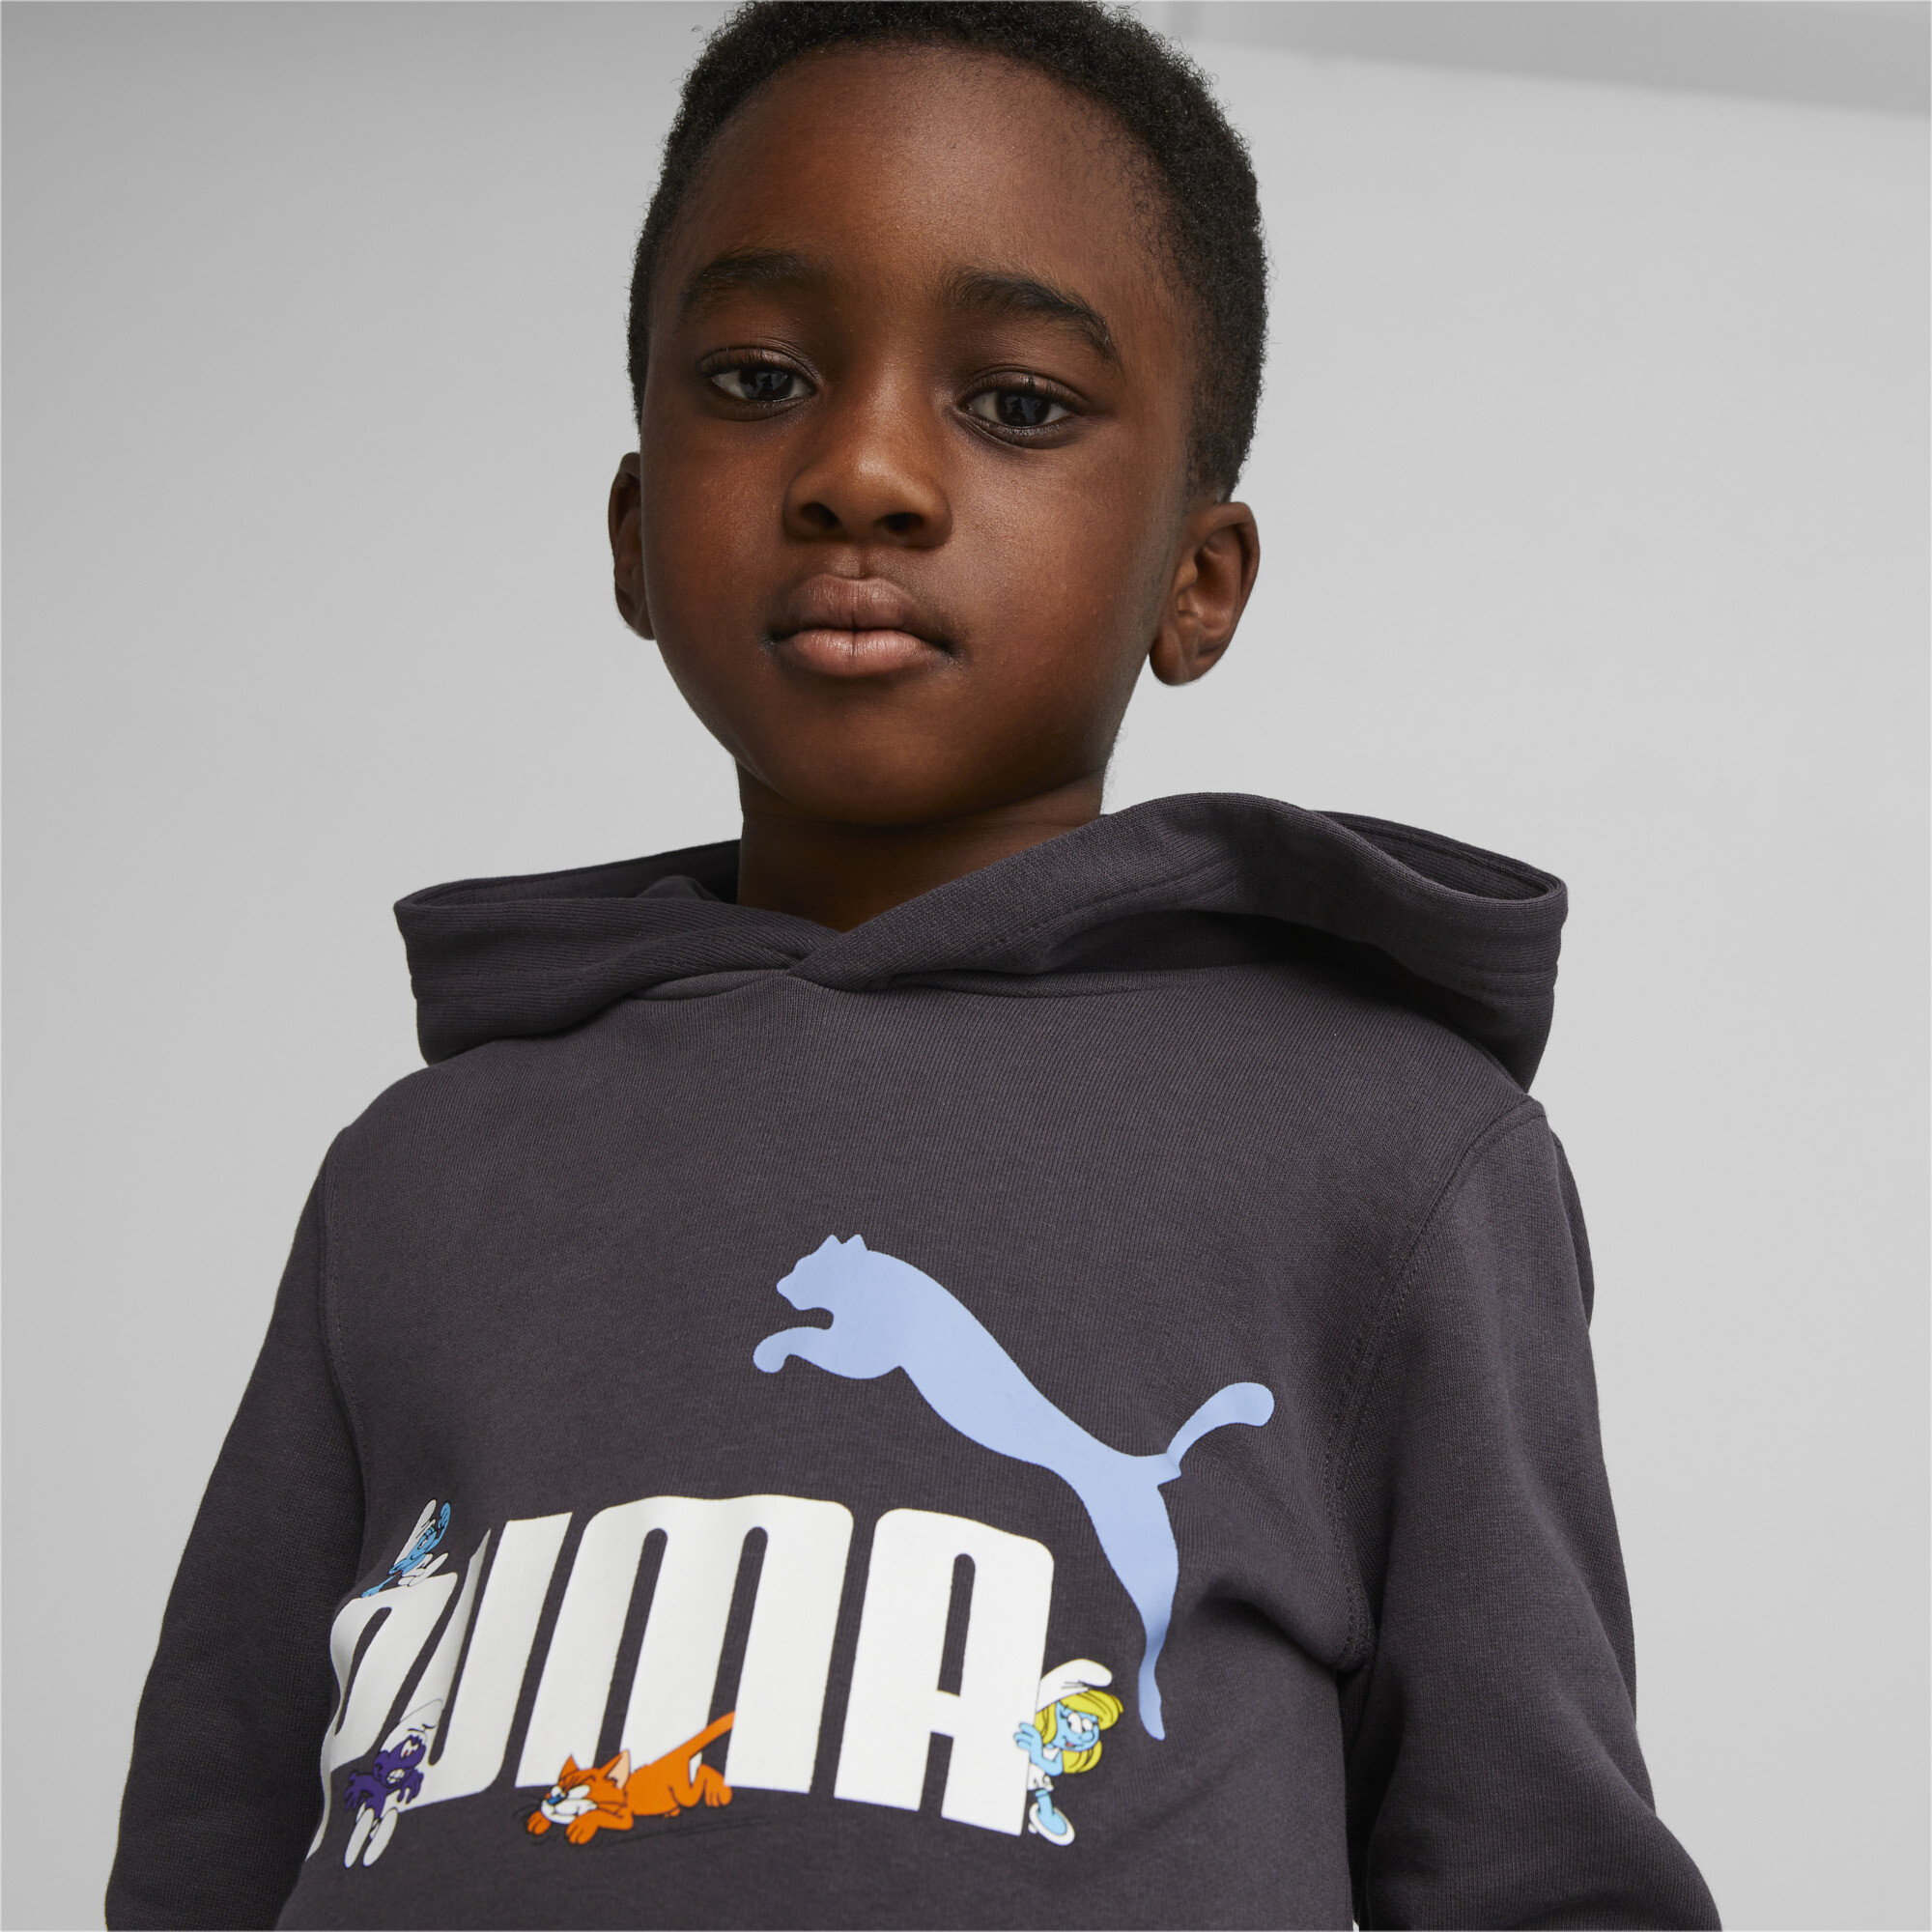 PUMA X THE SMURFS Hoodie In Gray, Size 5-6 Youth